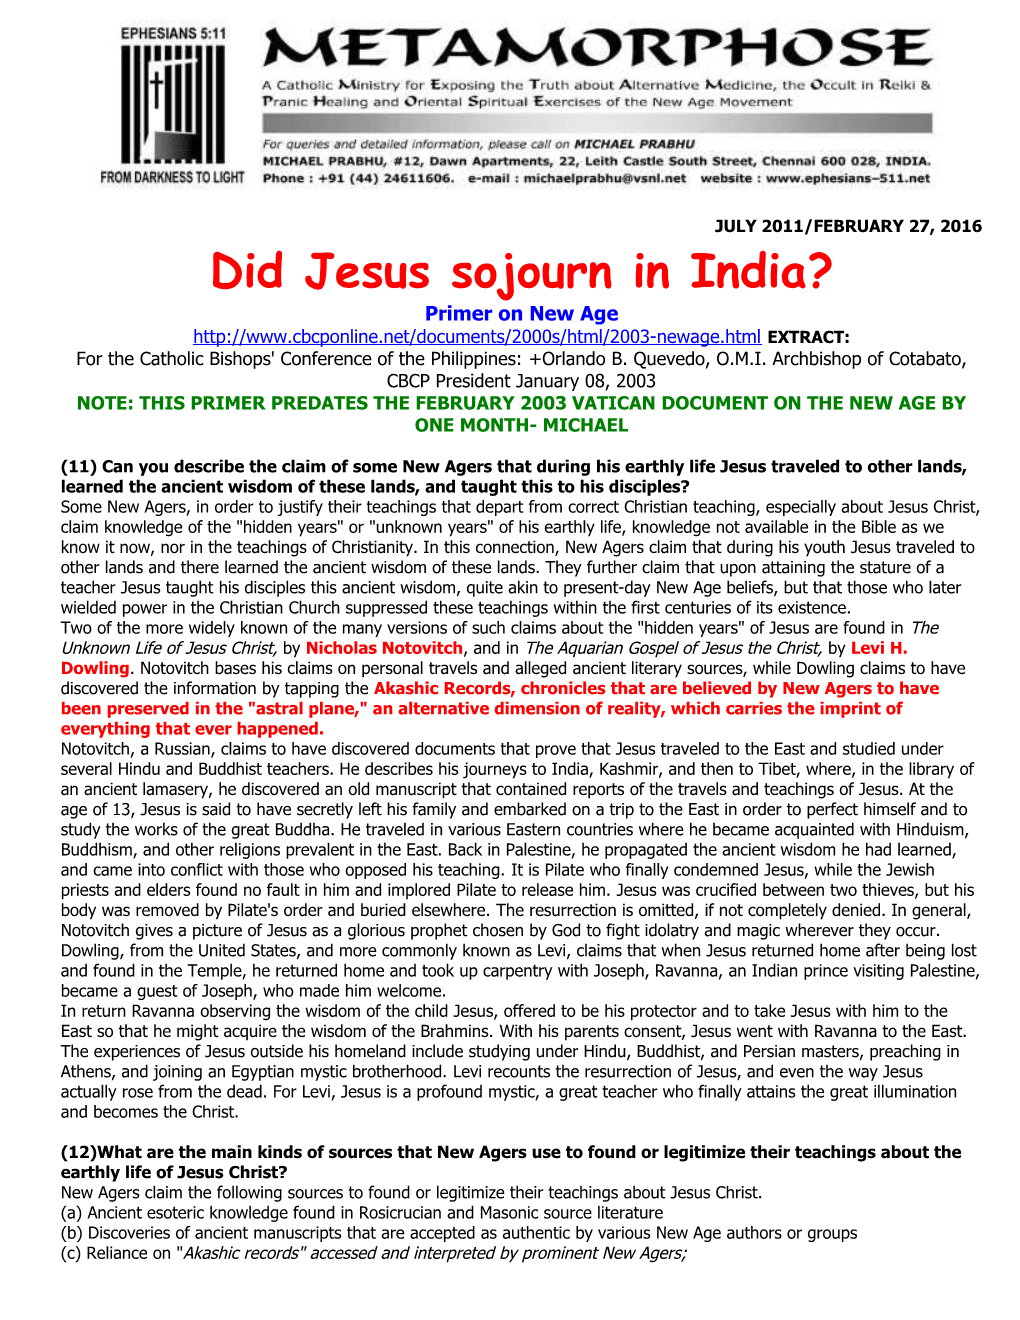 Did Jesus Sojourn in India?